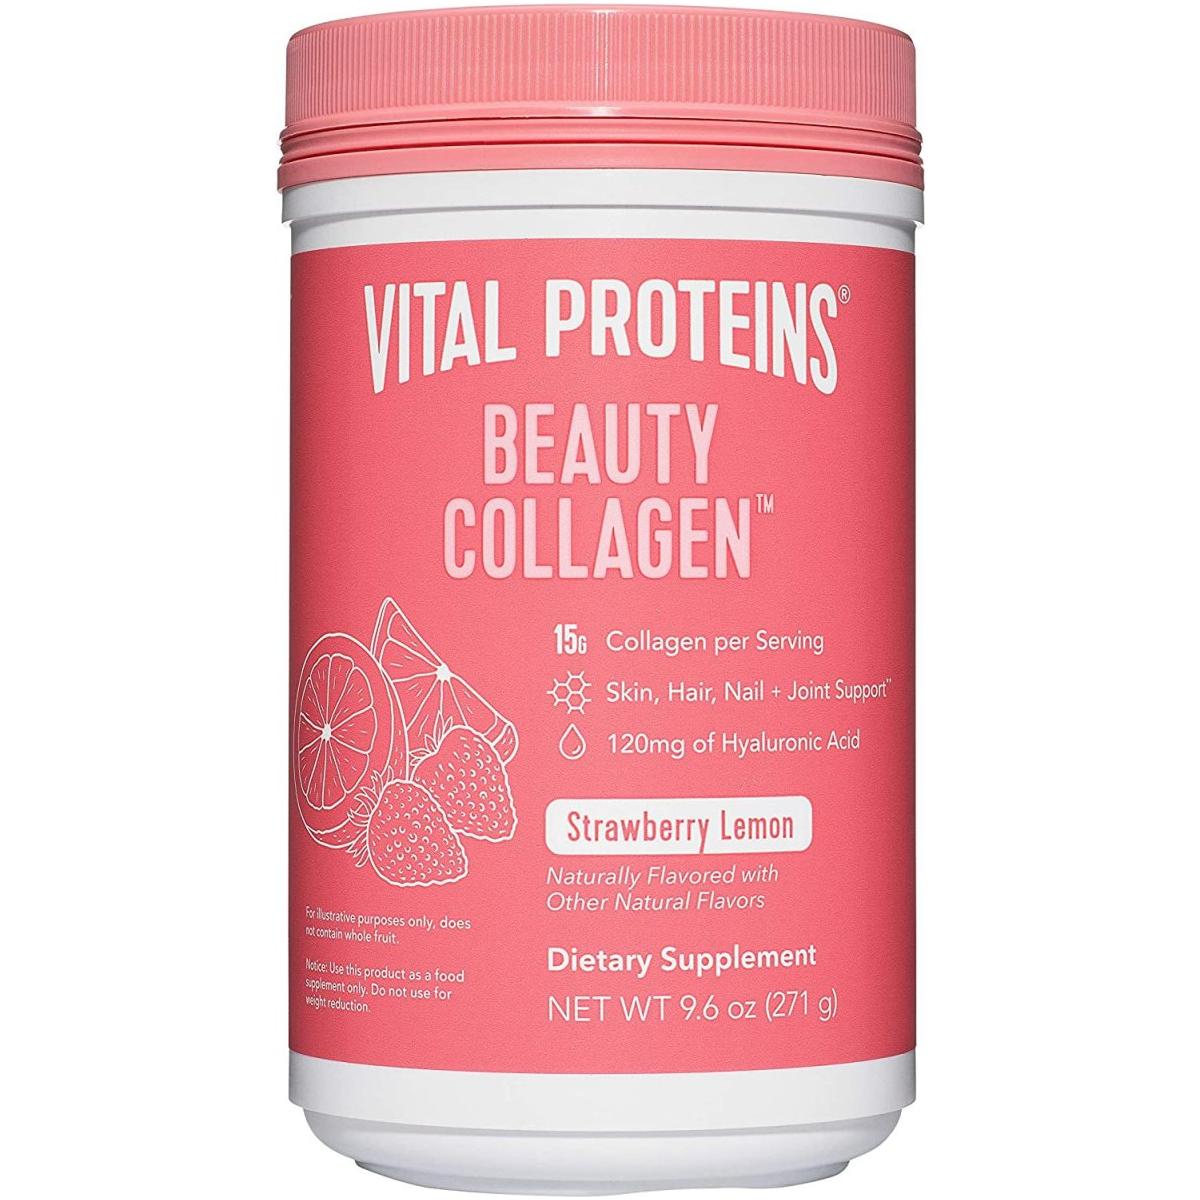 Vital Proteins Beauty Collagen (Strawberry Lemon, Canister) - 120Mg of Hyaluronic Acid and 15G of Collagen per Serving - Glam Global UK